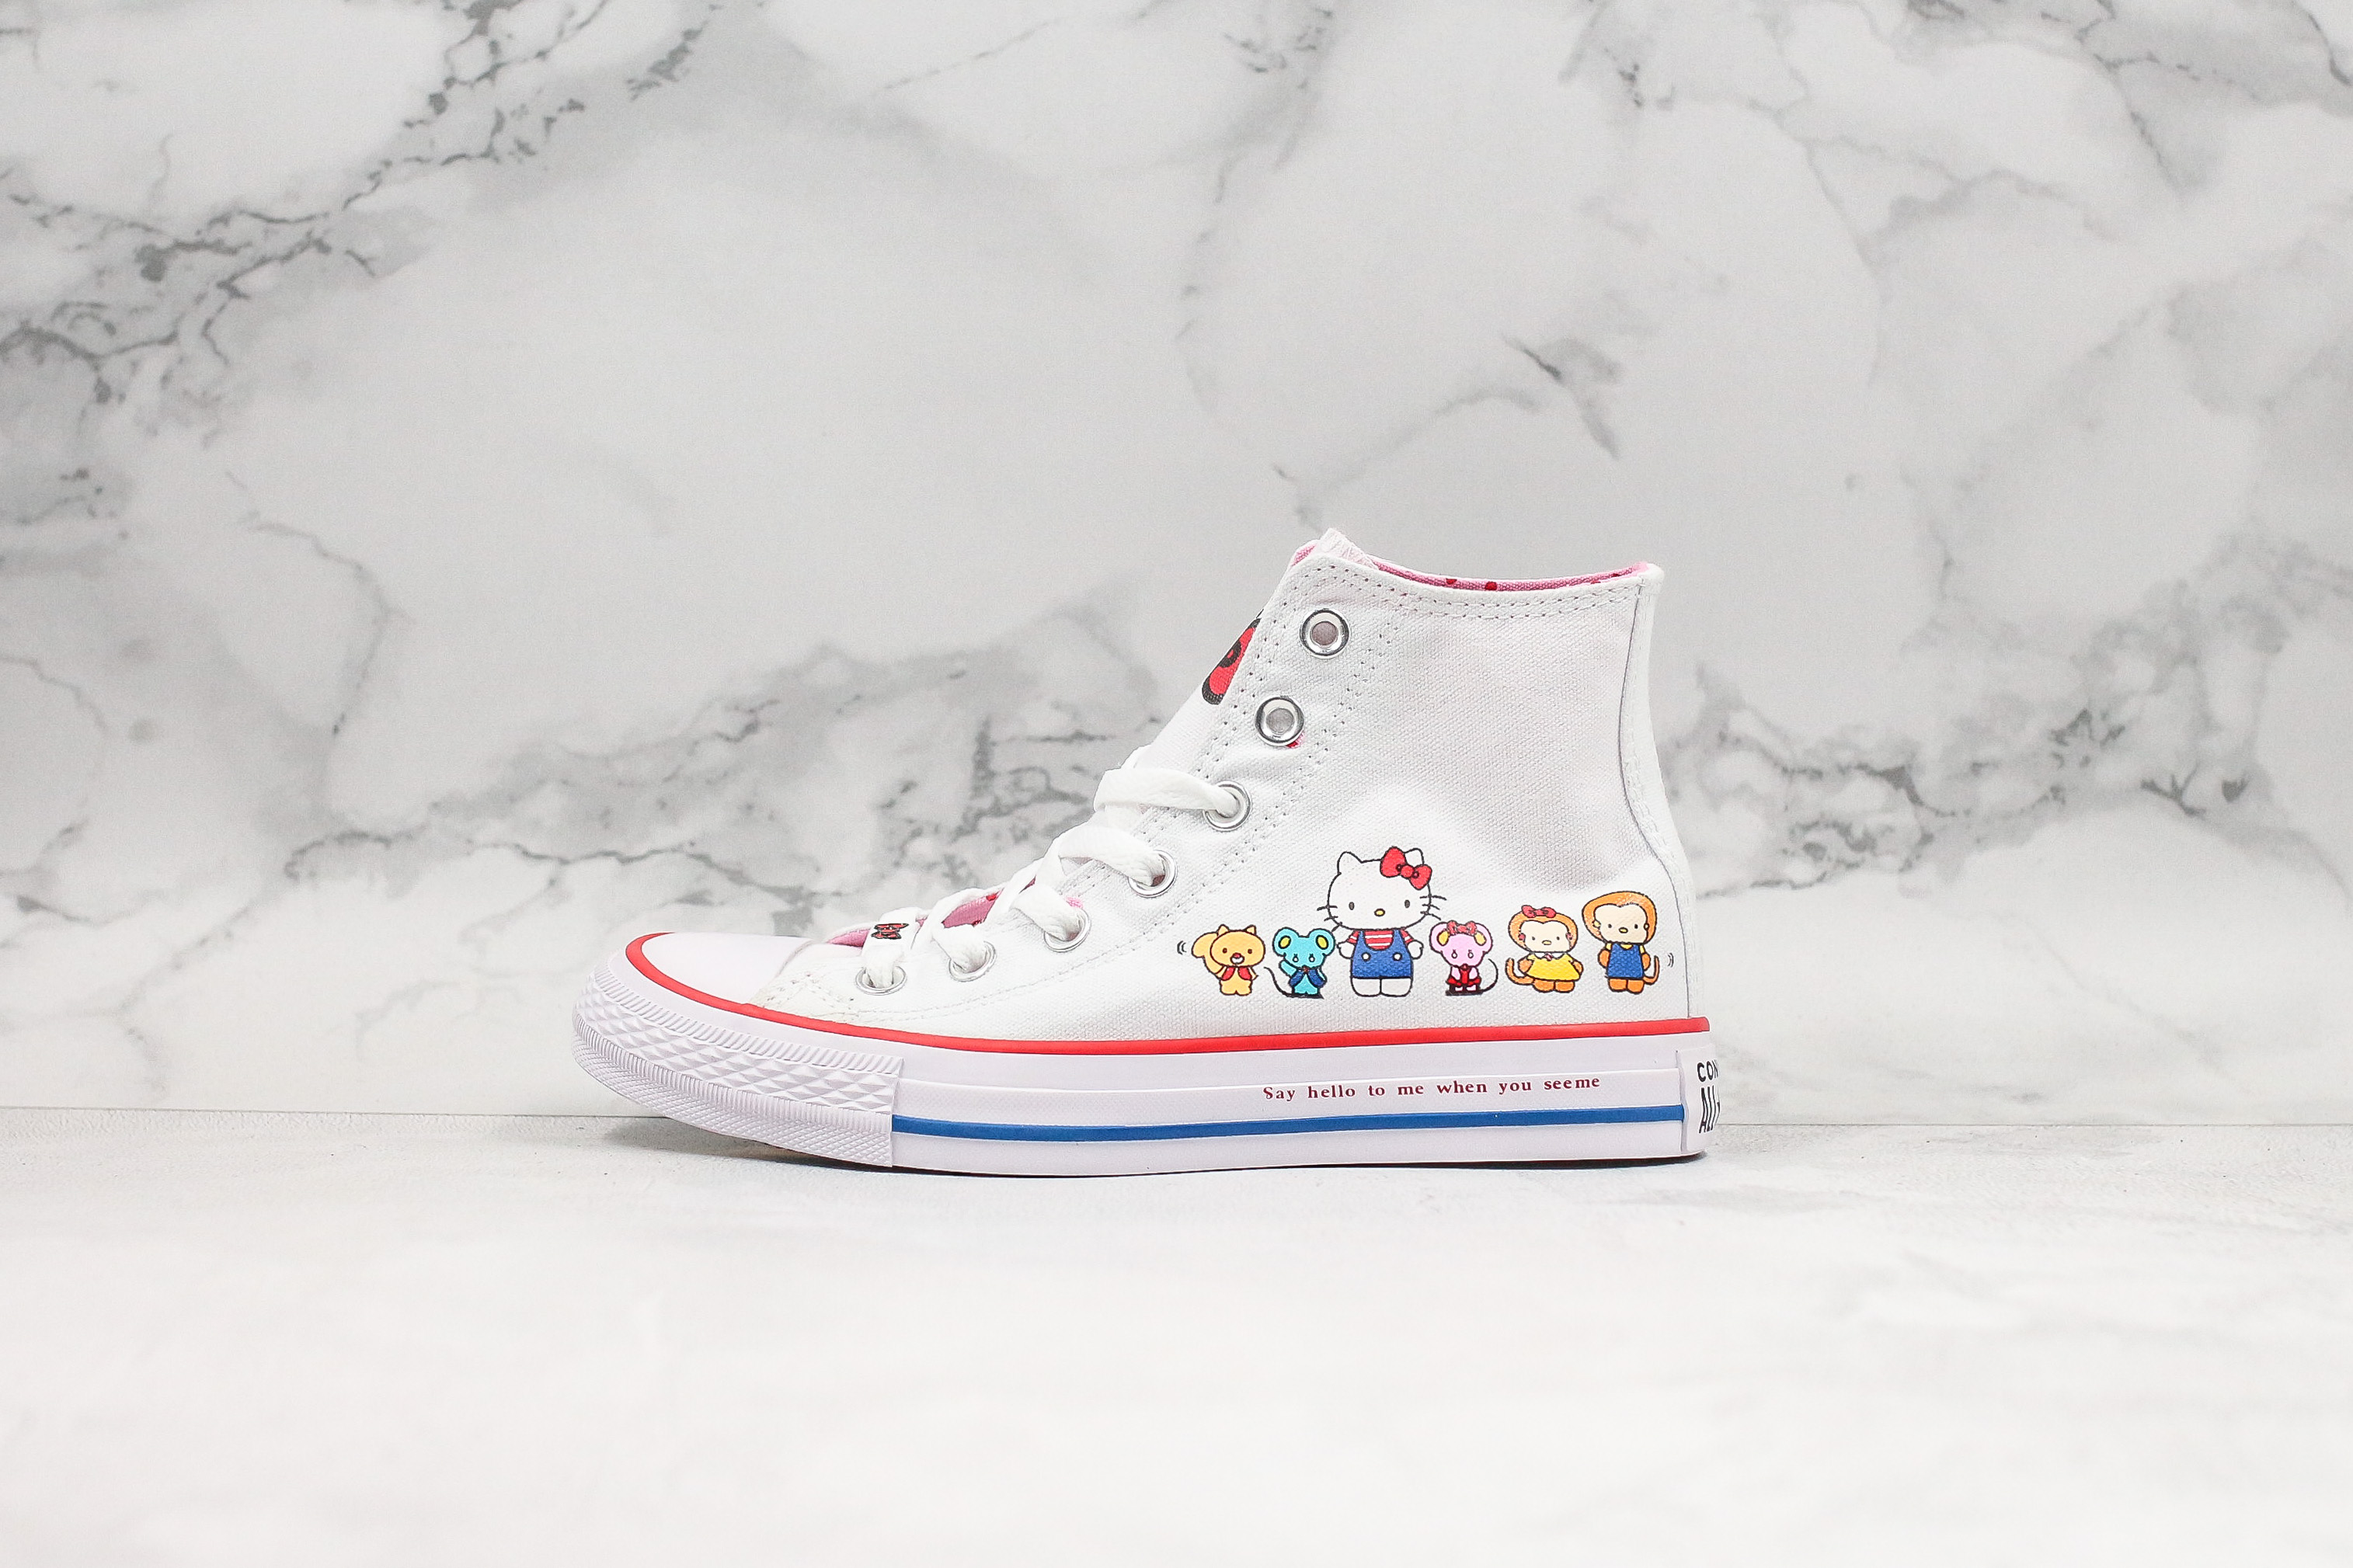 hello kitty converse pink high tops